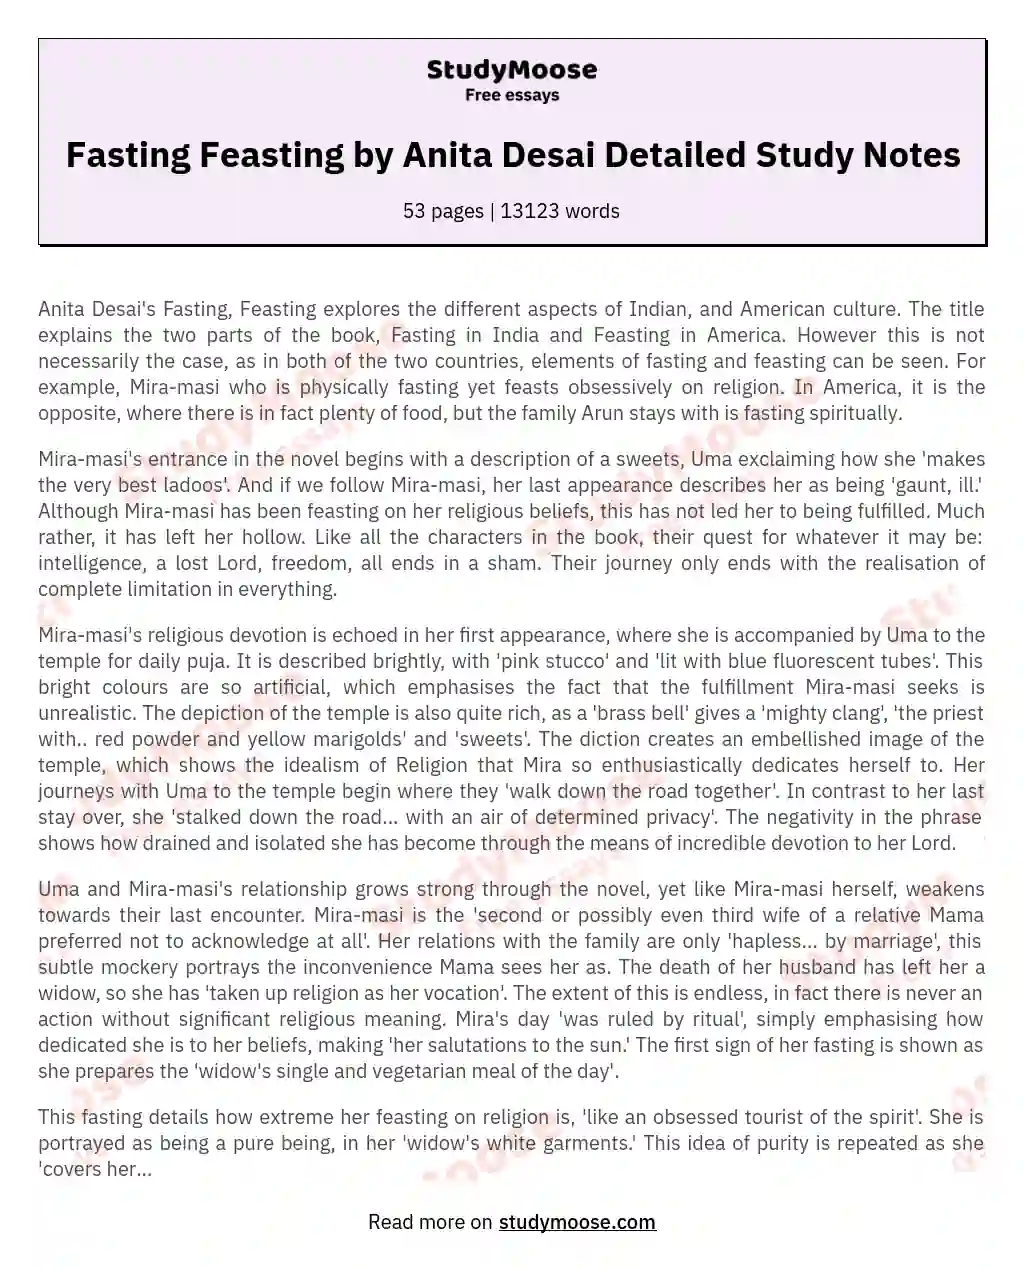 Fasting Feasting by Anita Desai Detailed Study Notes essay